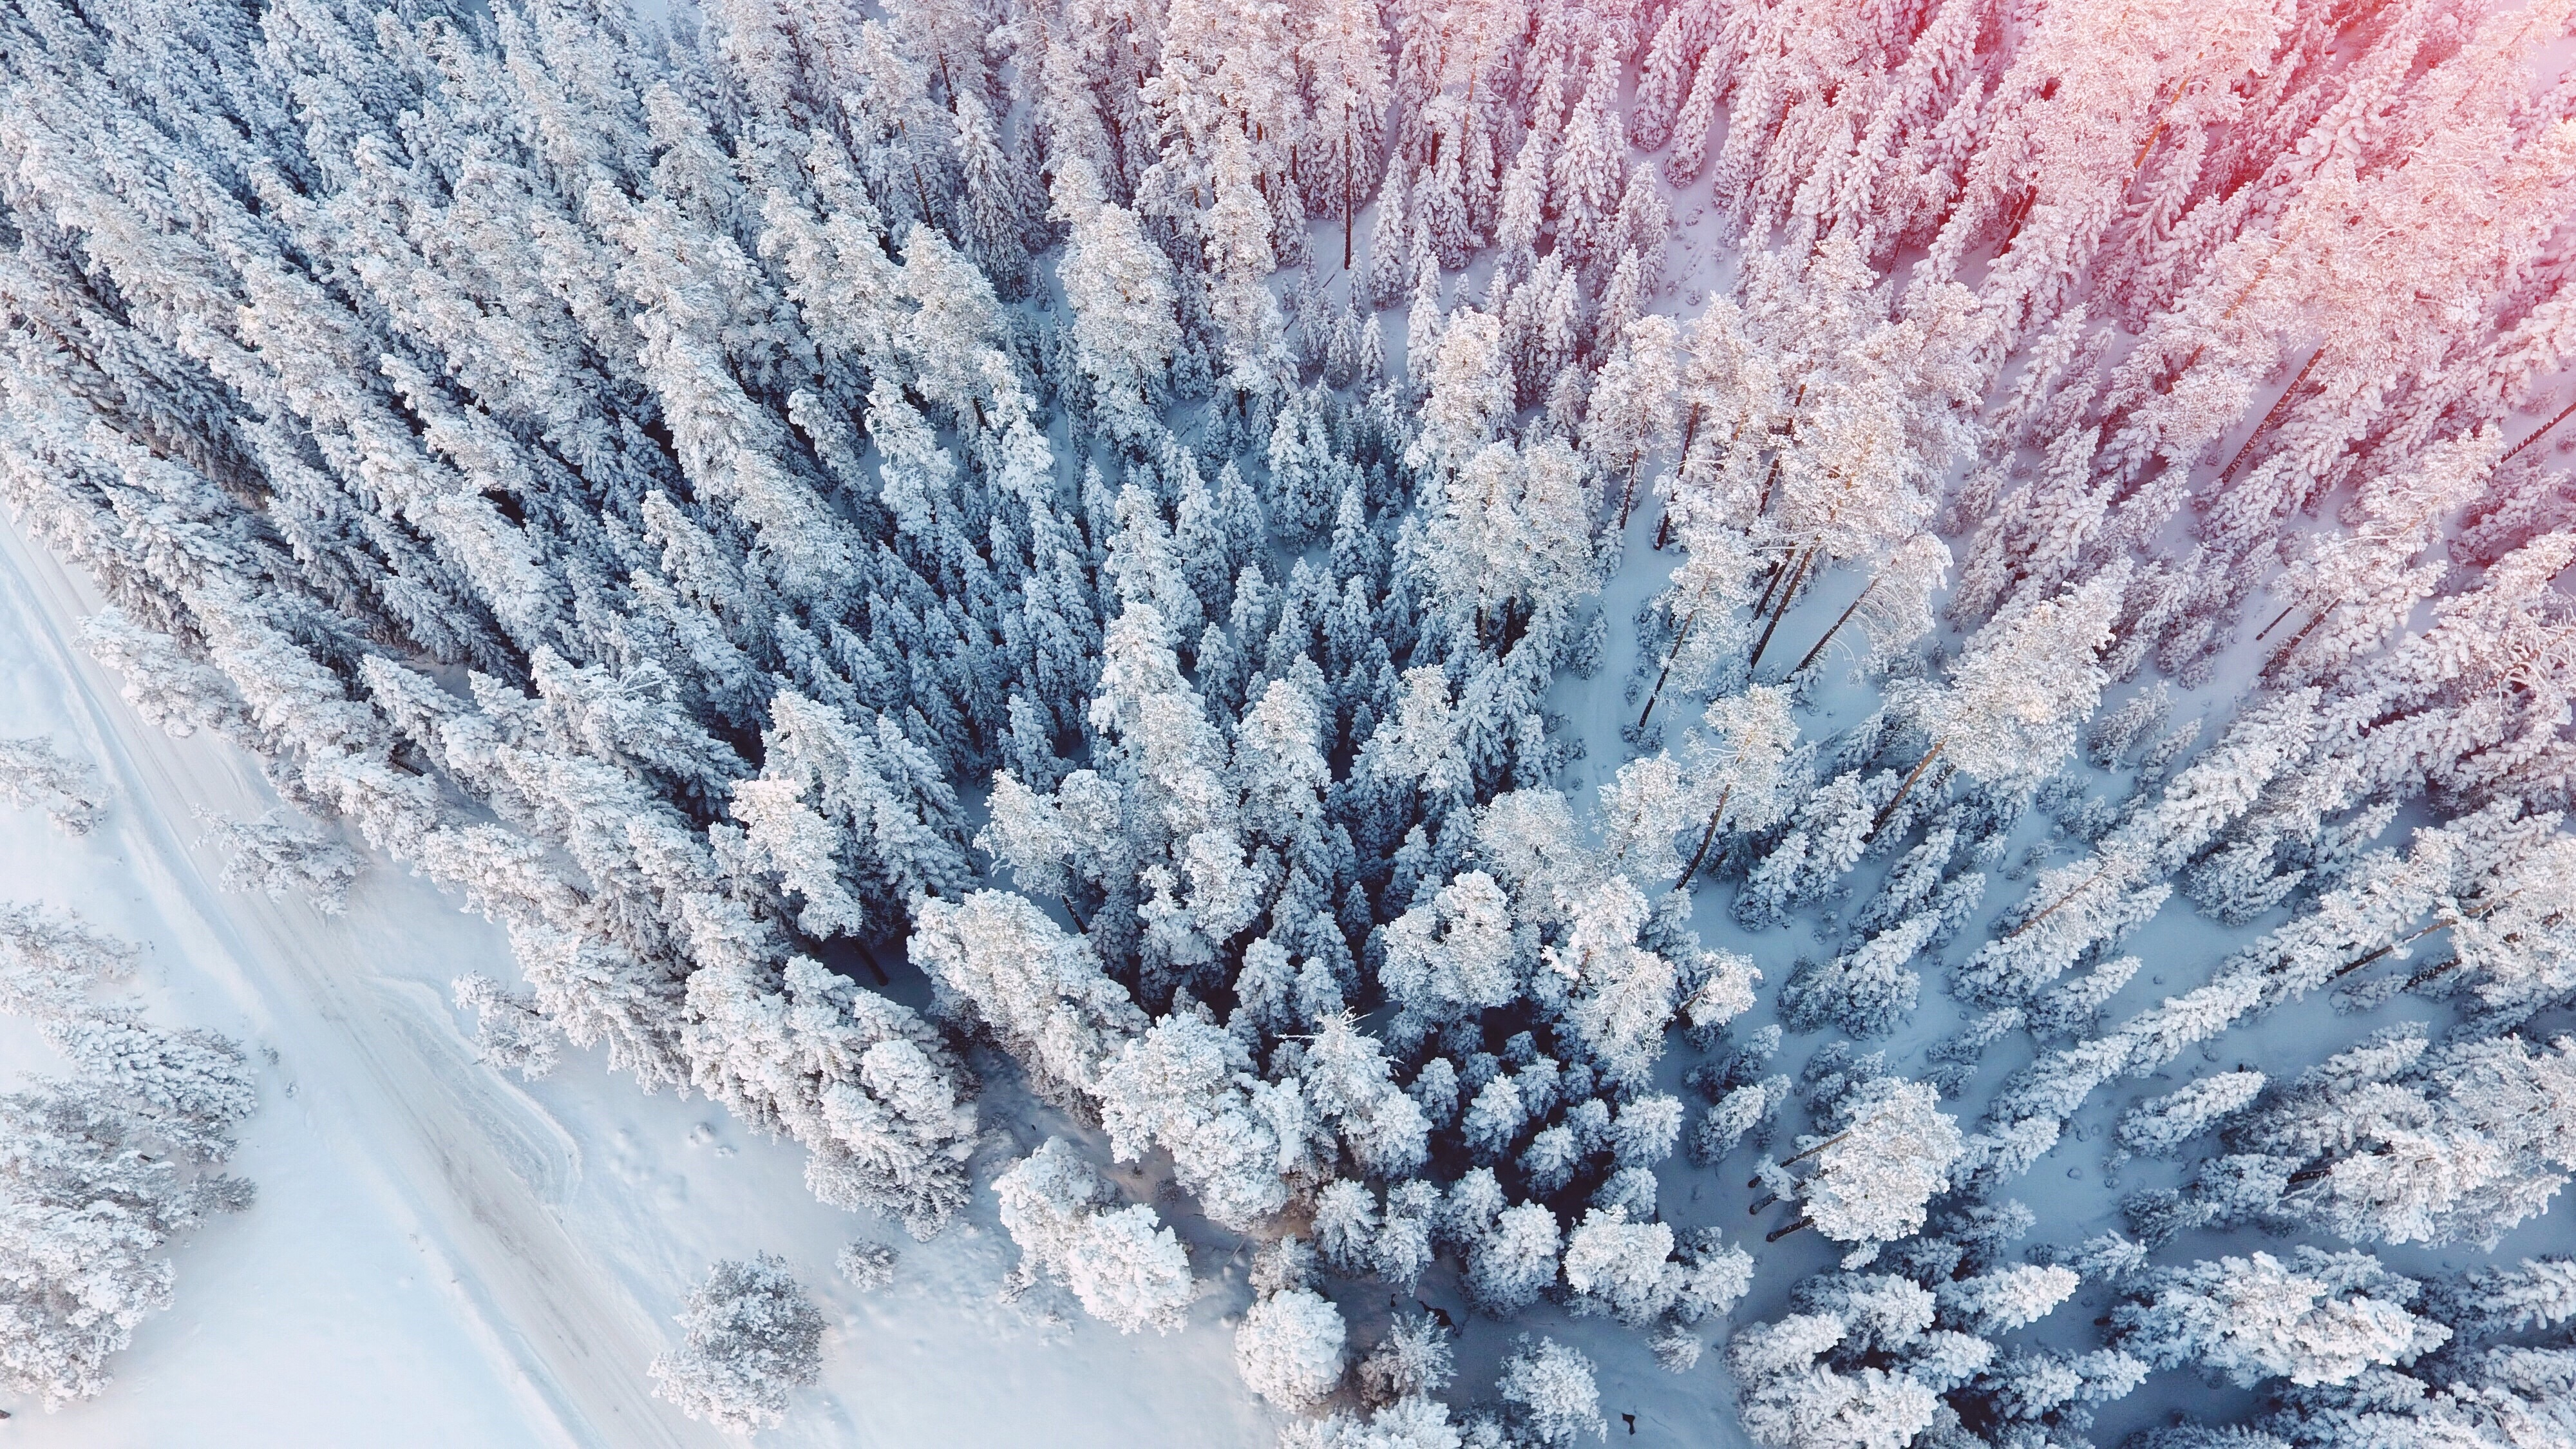 The trees are all in snow, view from the quadrocopter